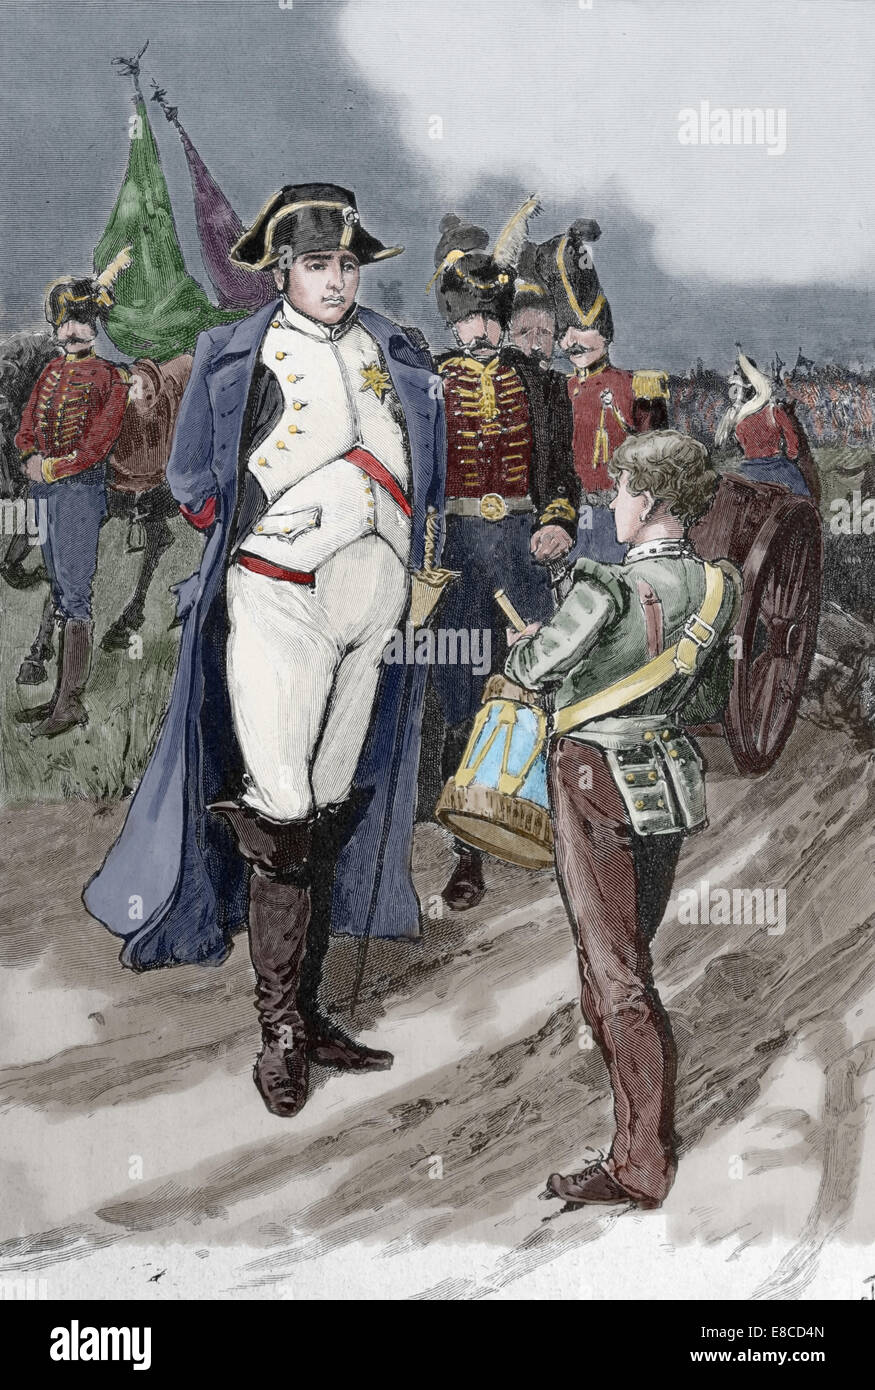 Napoleon I (1769-1821). French military and political. Emperor of the French from 1804-1814. Emperor and drummer boy. Engraving Stock Photo